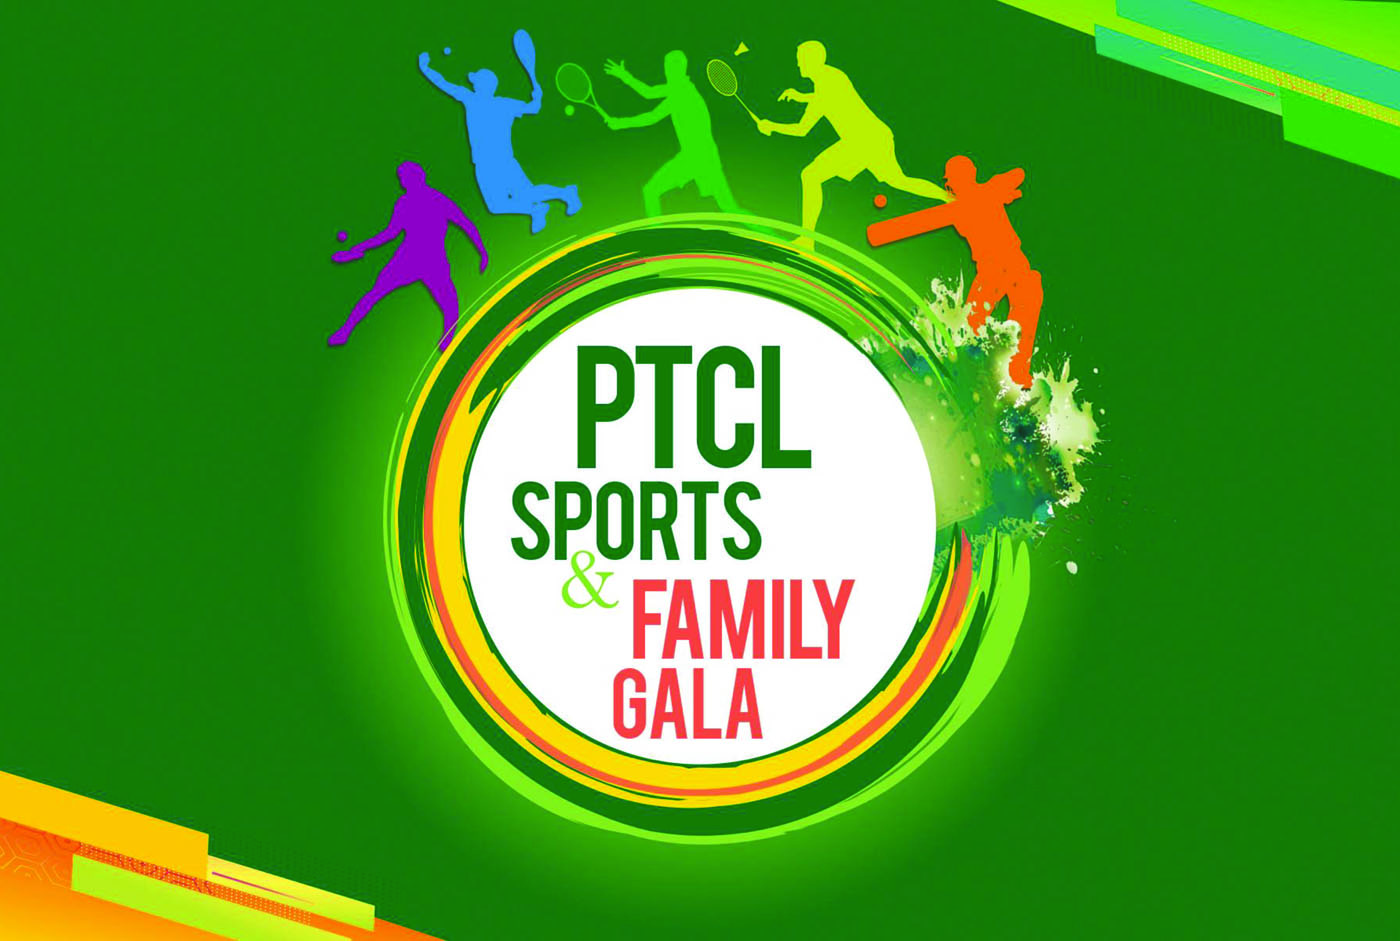 PTCL SPORTS GALA 2018 STARTS IN THE CAPITAL